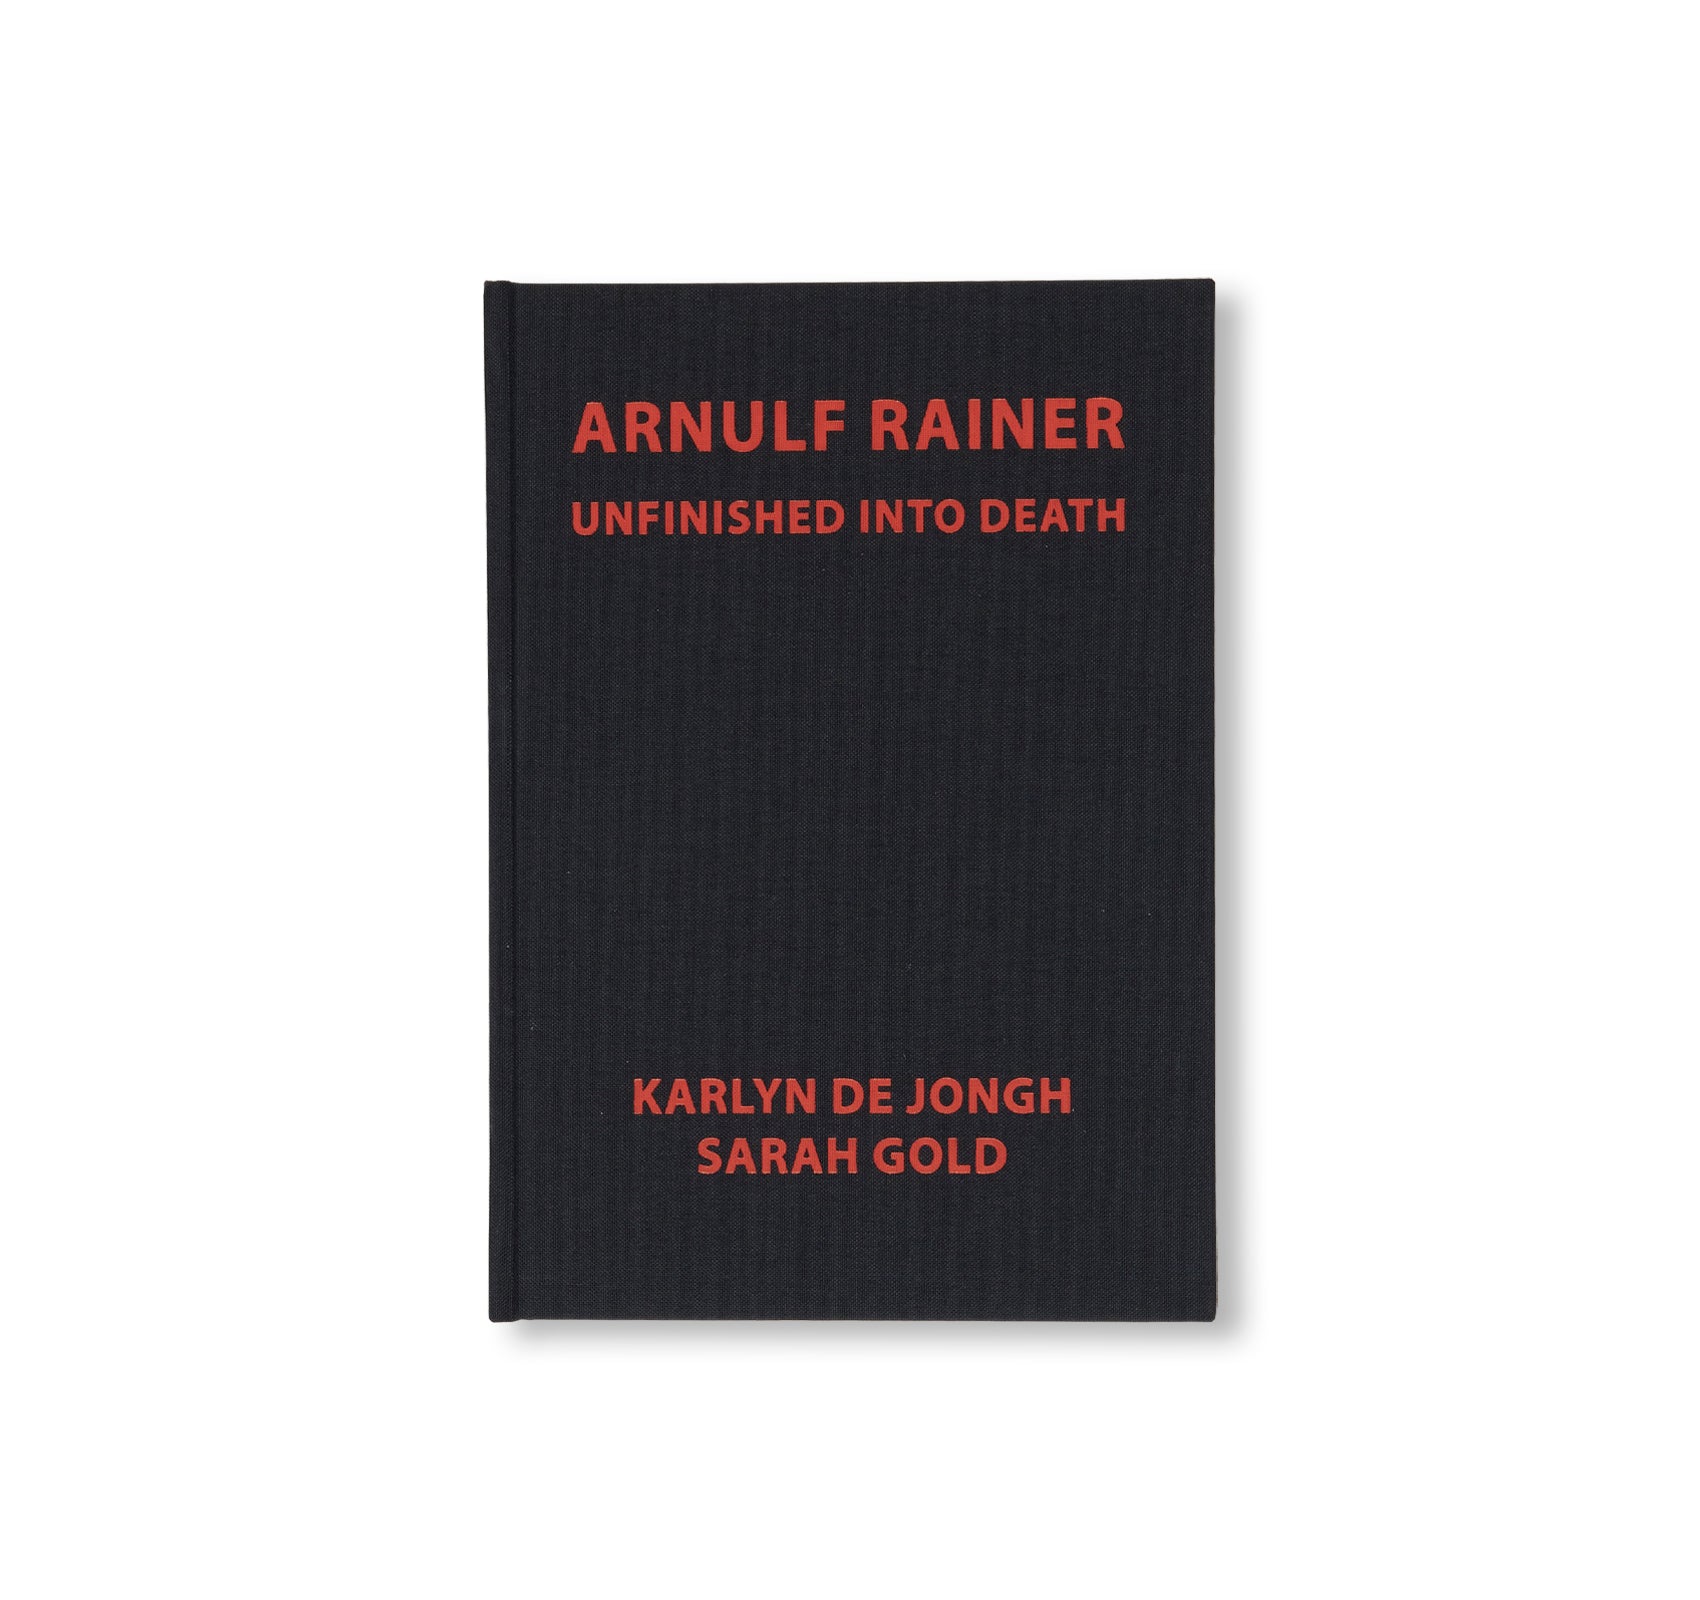 UNFINISHED TO DEATH by Arnulf Rainer